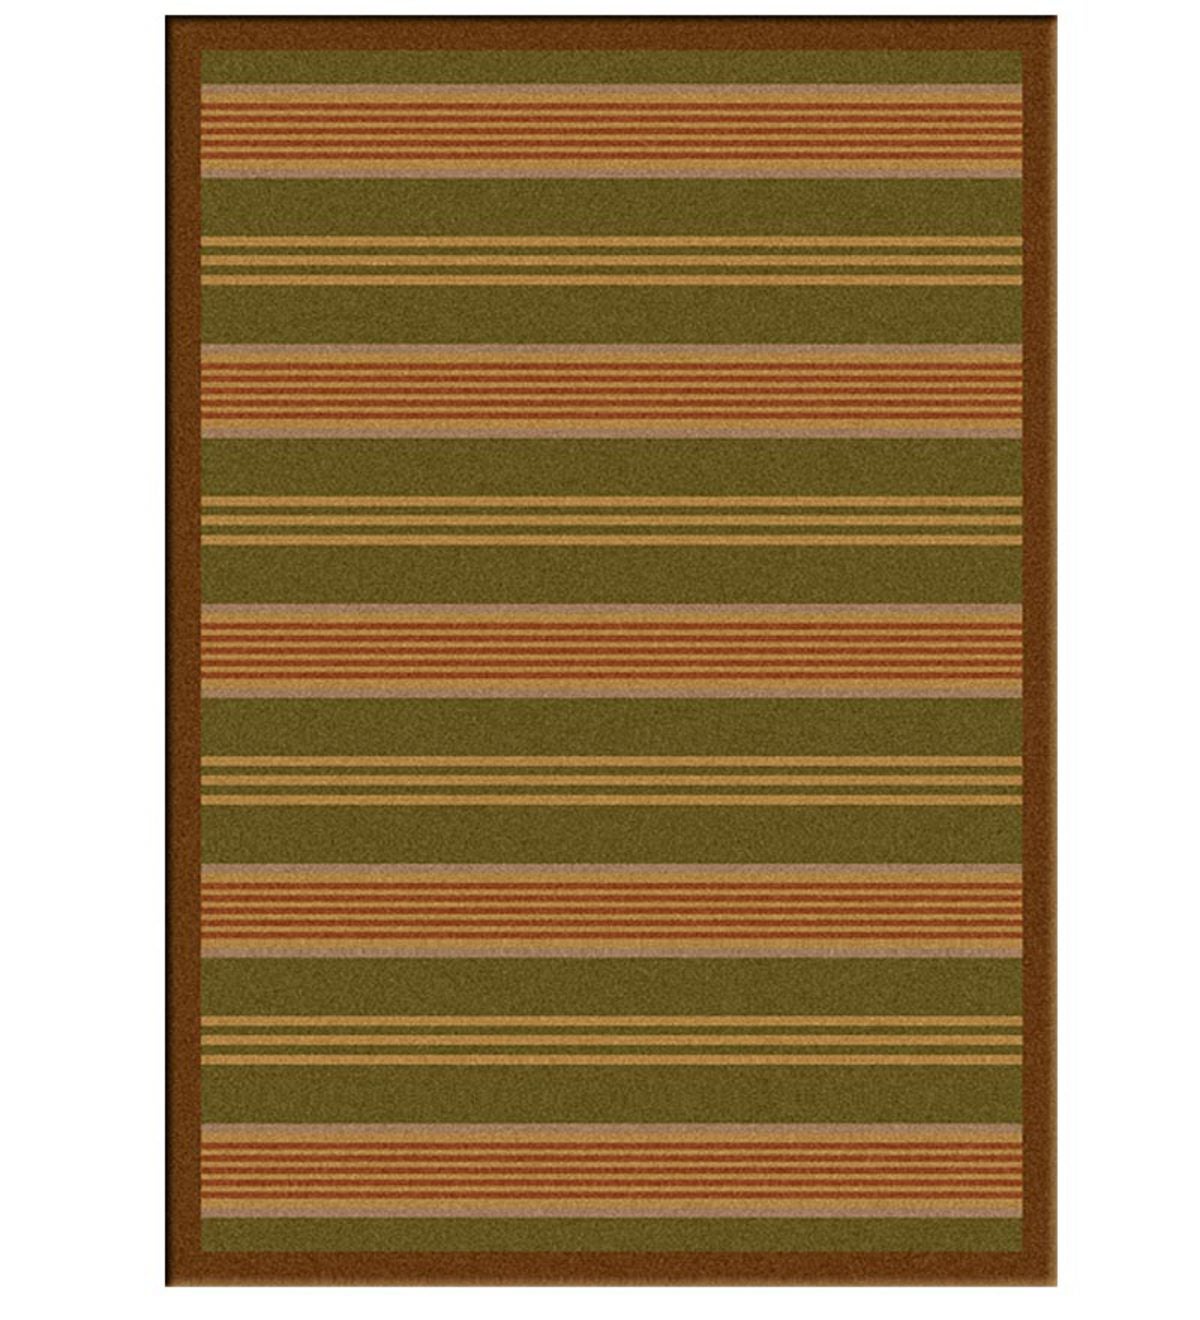 2' x 8' Frontier Stripe Area Runner - Green background with tan stripe